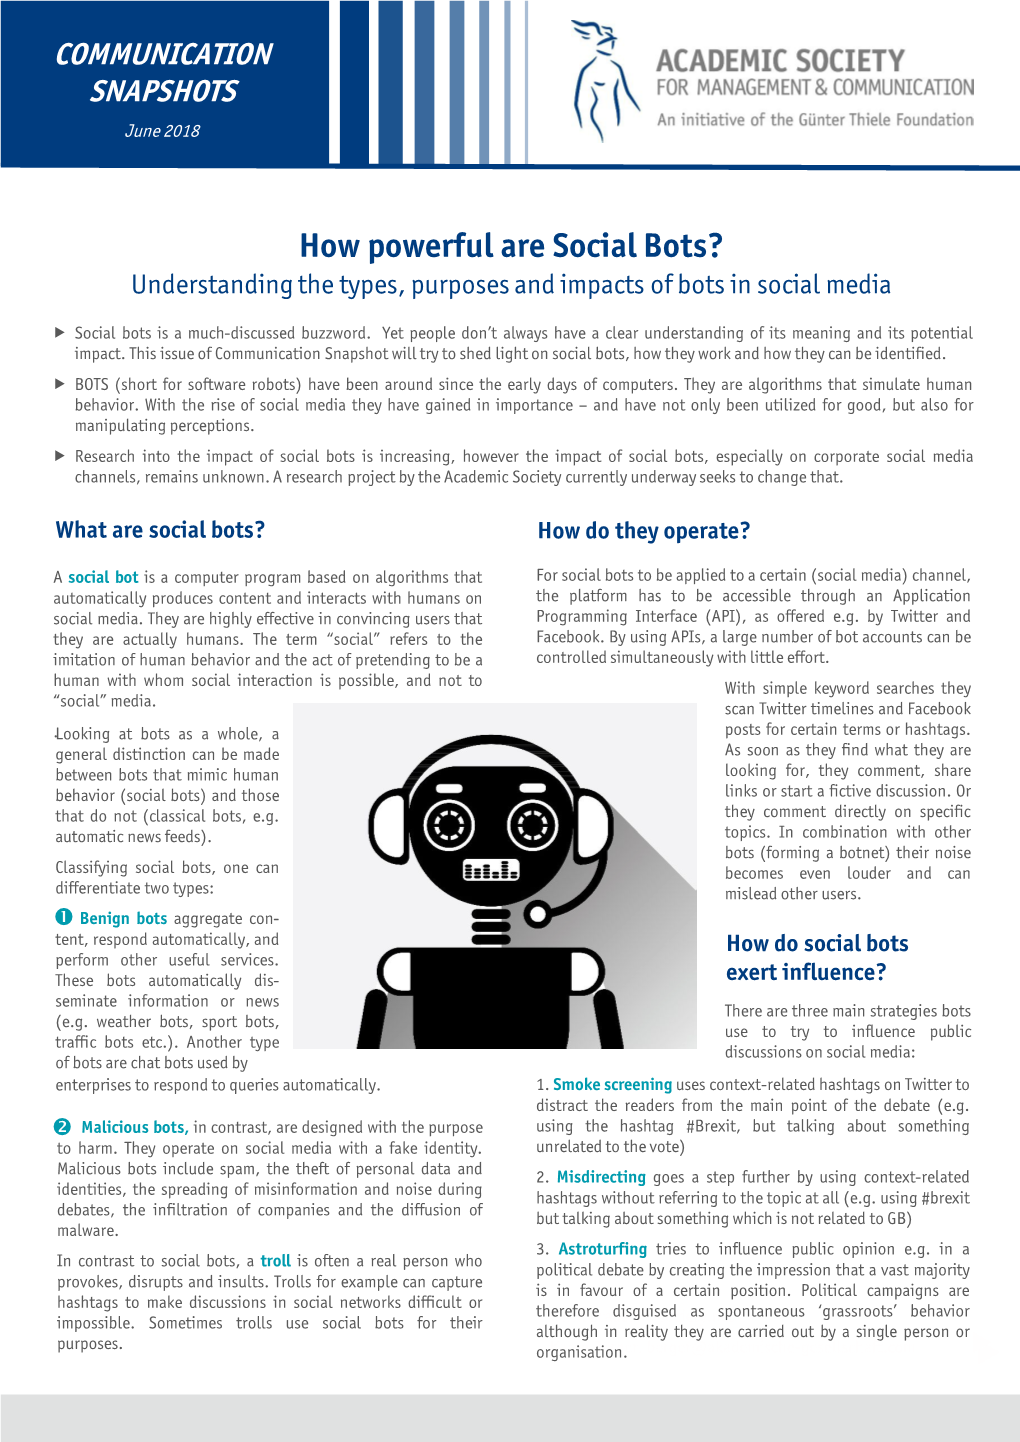 How Powerful Are Social Bots? Understanding the Types, Purposes and Impacts of Bots in Social Media